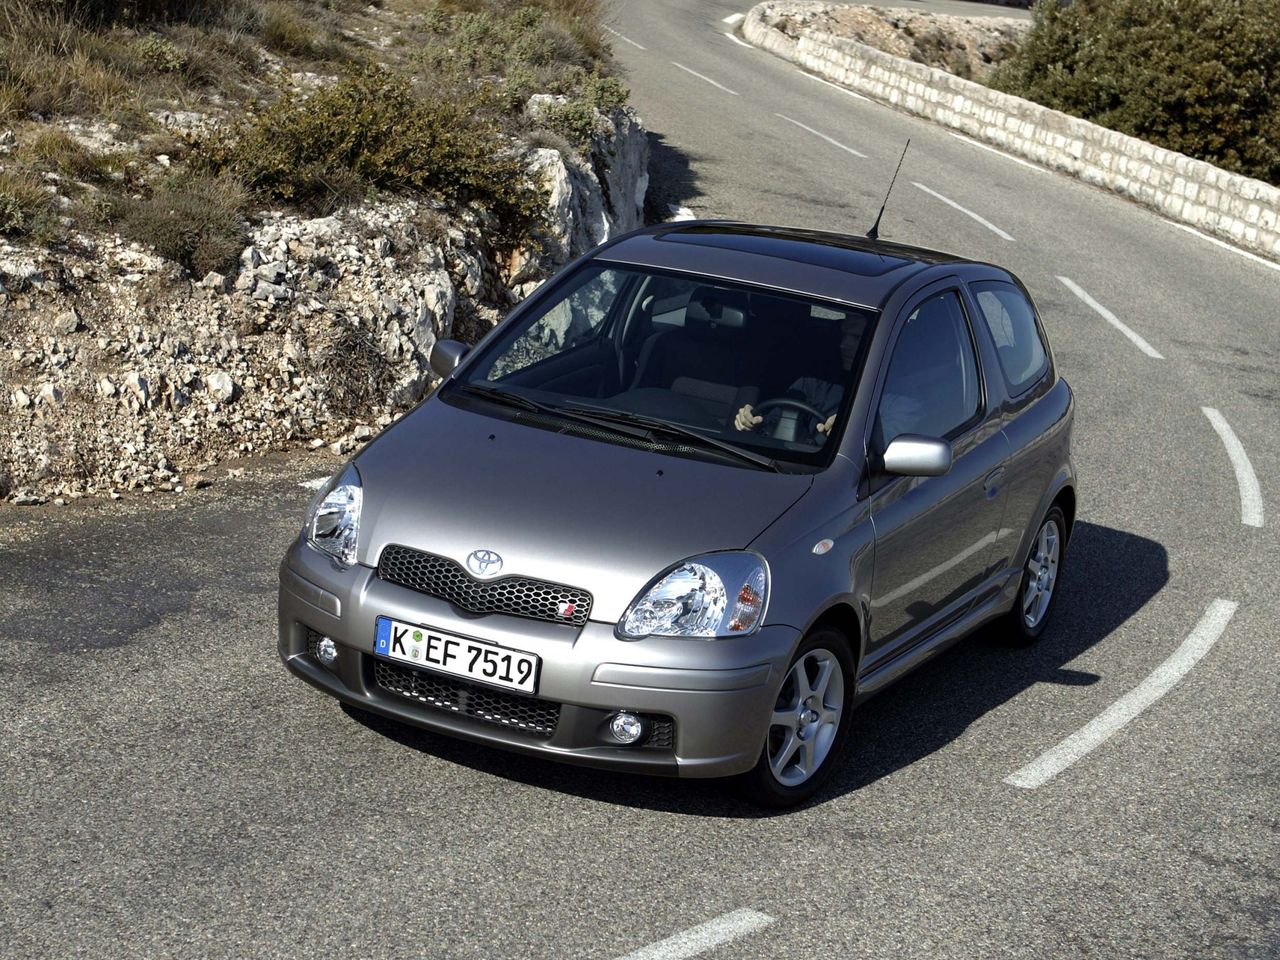 Toyota Yaris TS is the only variant of the first generation that is worth paying more than 10 thousand PLN for.